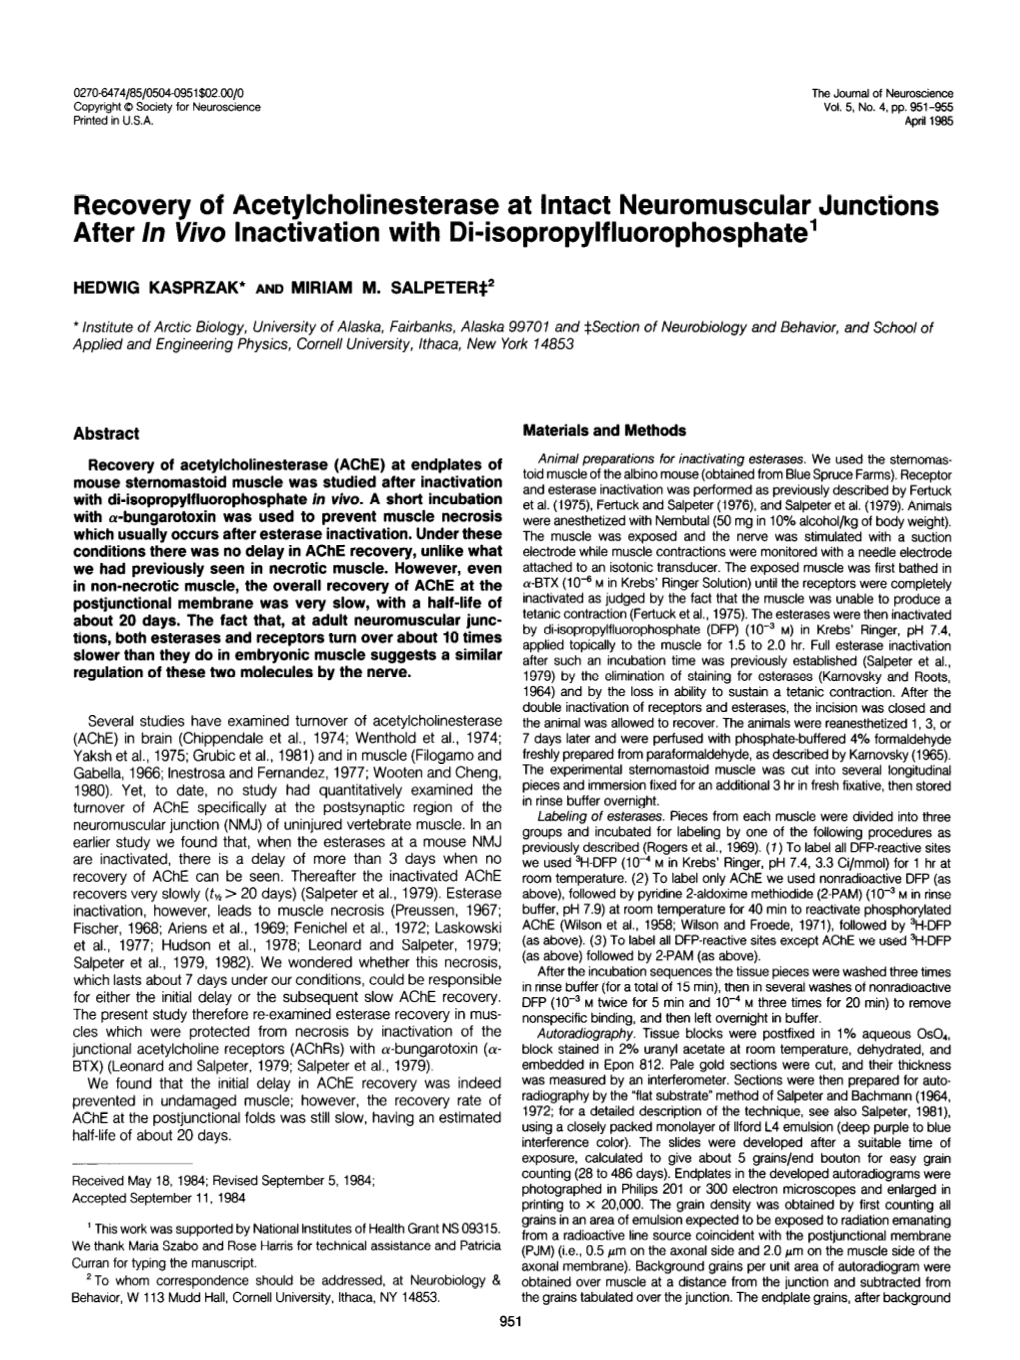 Recovery of Acetylcholinesterase at Intact Neuromuscular Junctions After in Viva Inactivation with Di-Isopropylfluorophosphate’